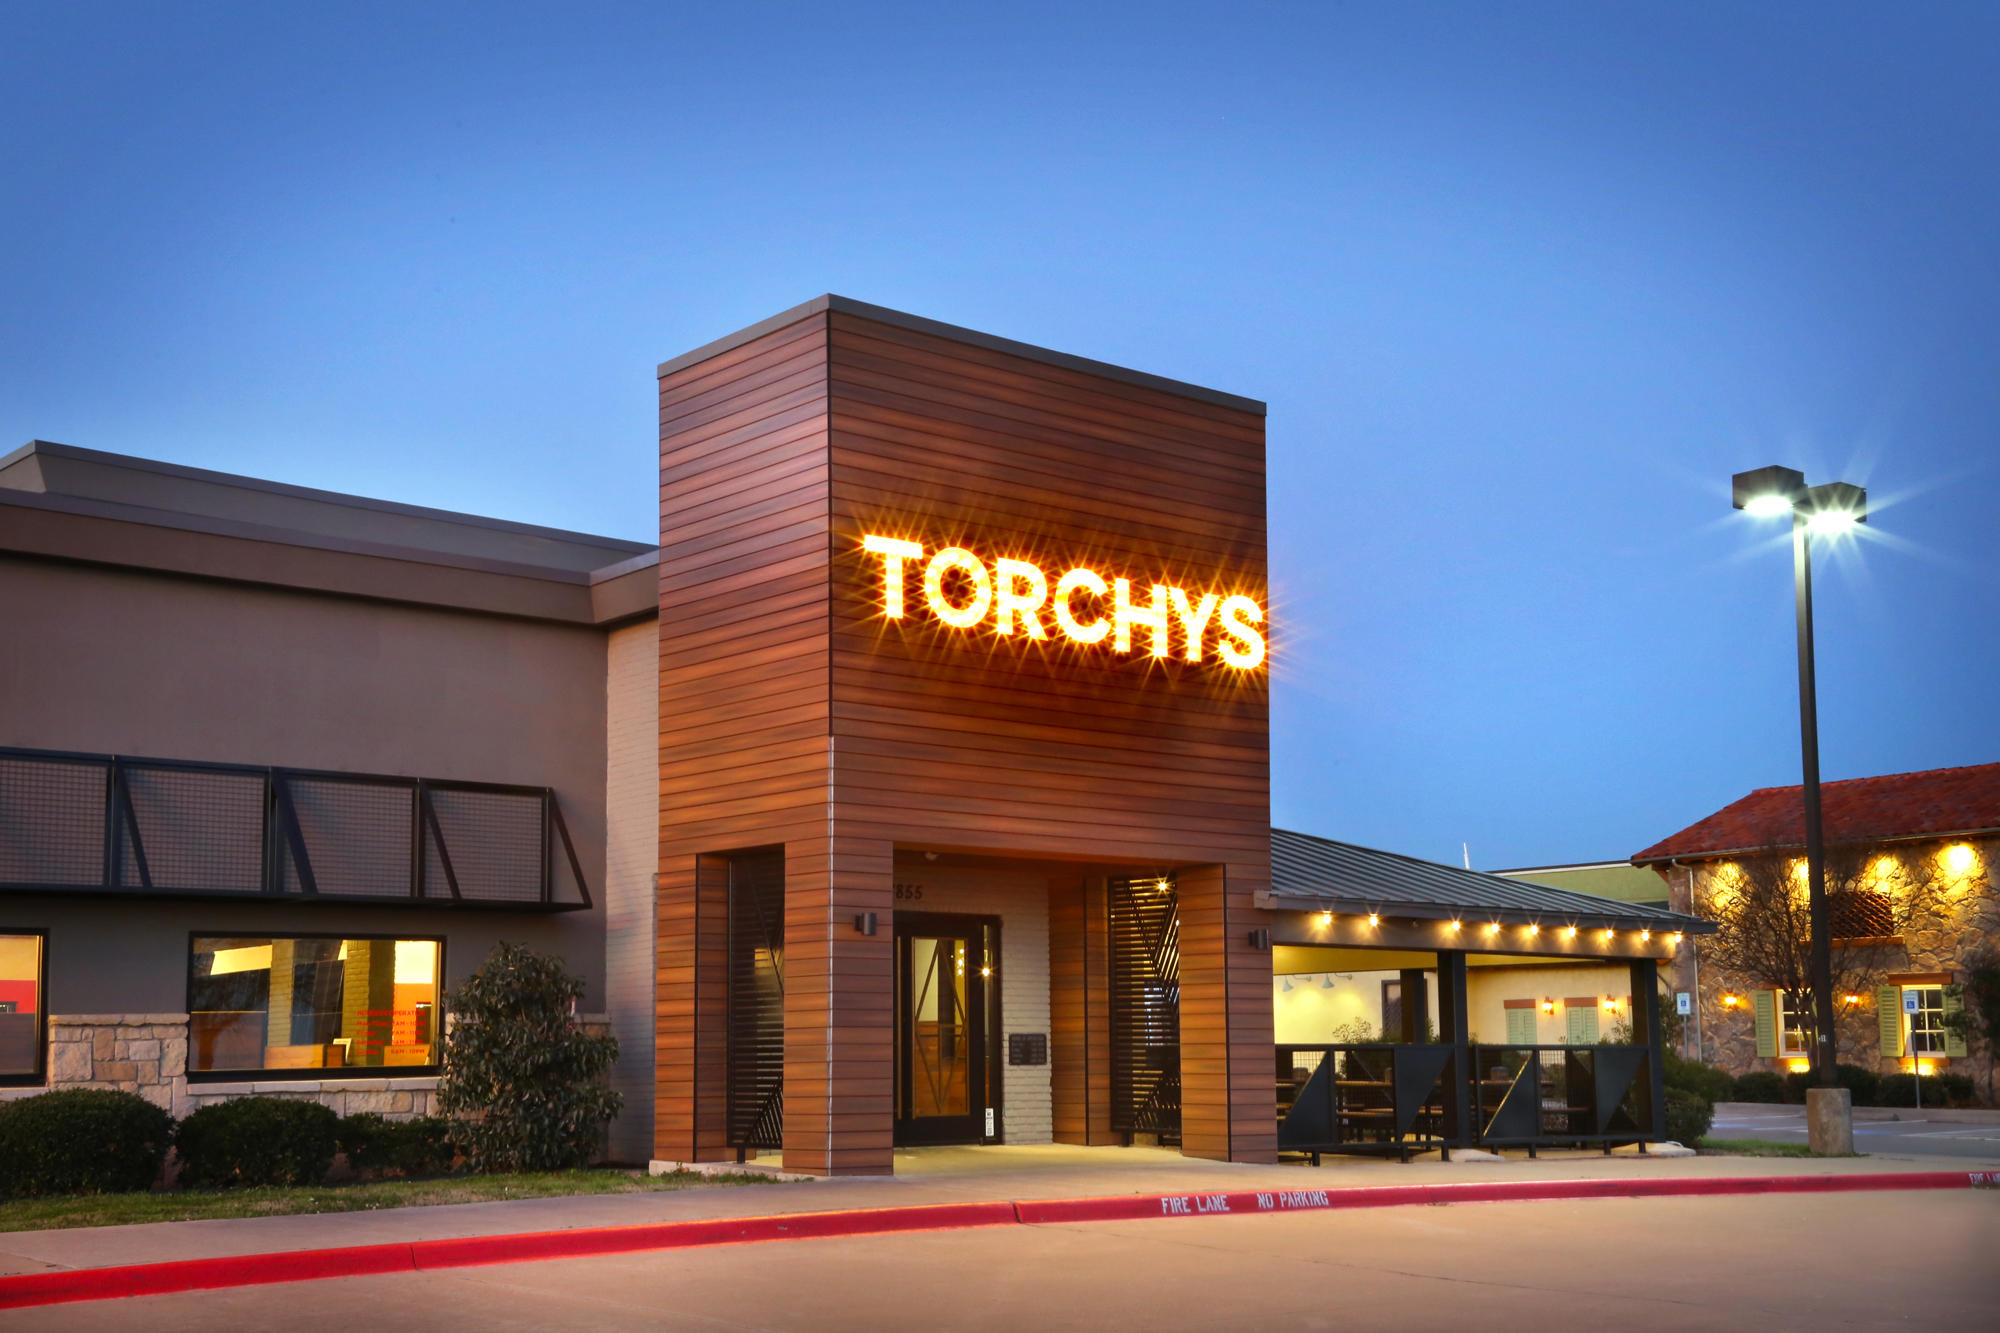 Torchy's Tacos Photo